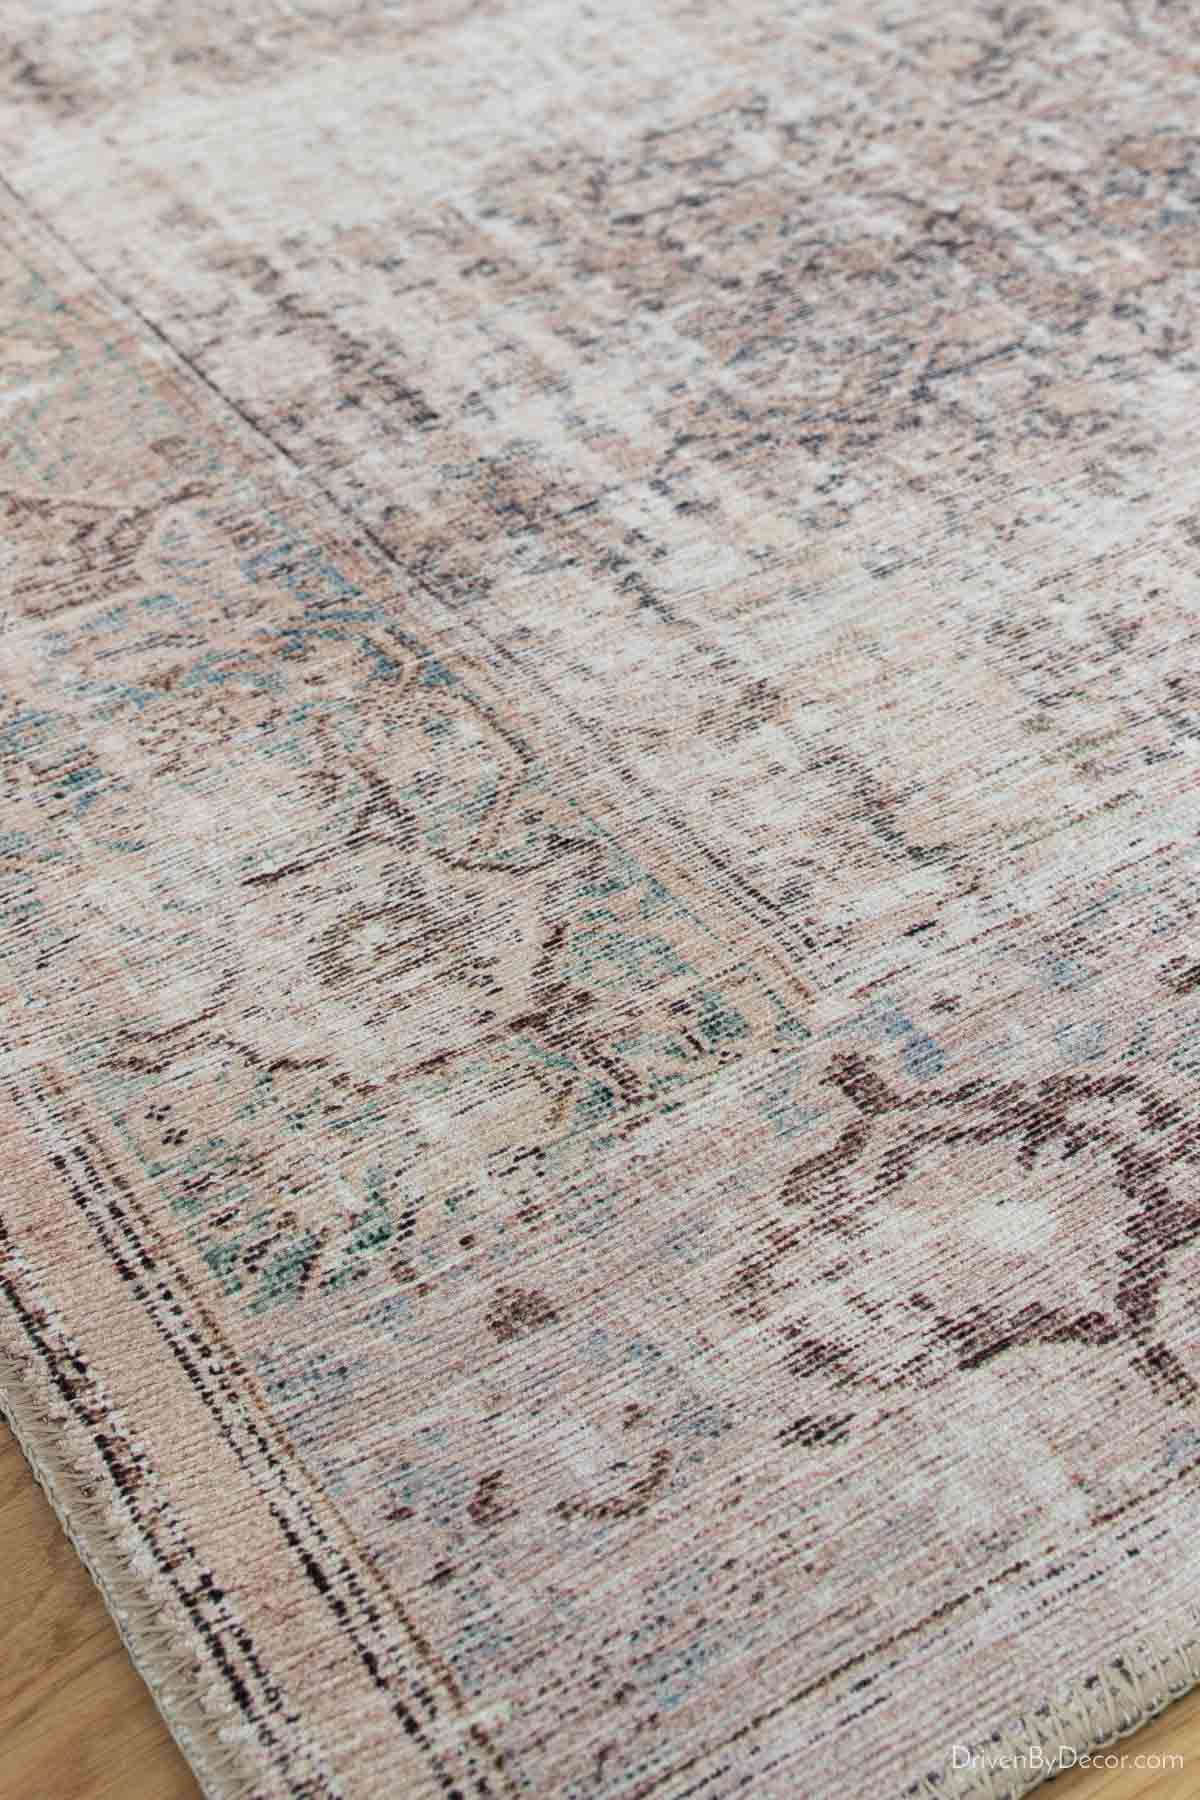 Vintage style area rug that's fade- and stain-resistant